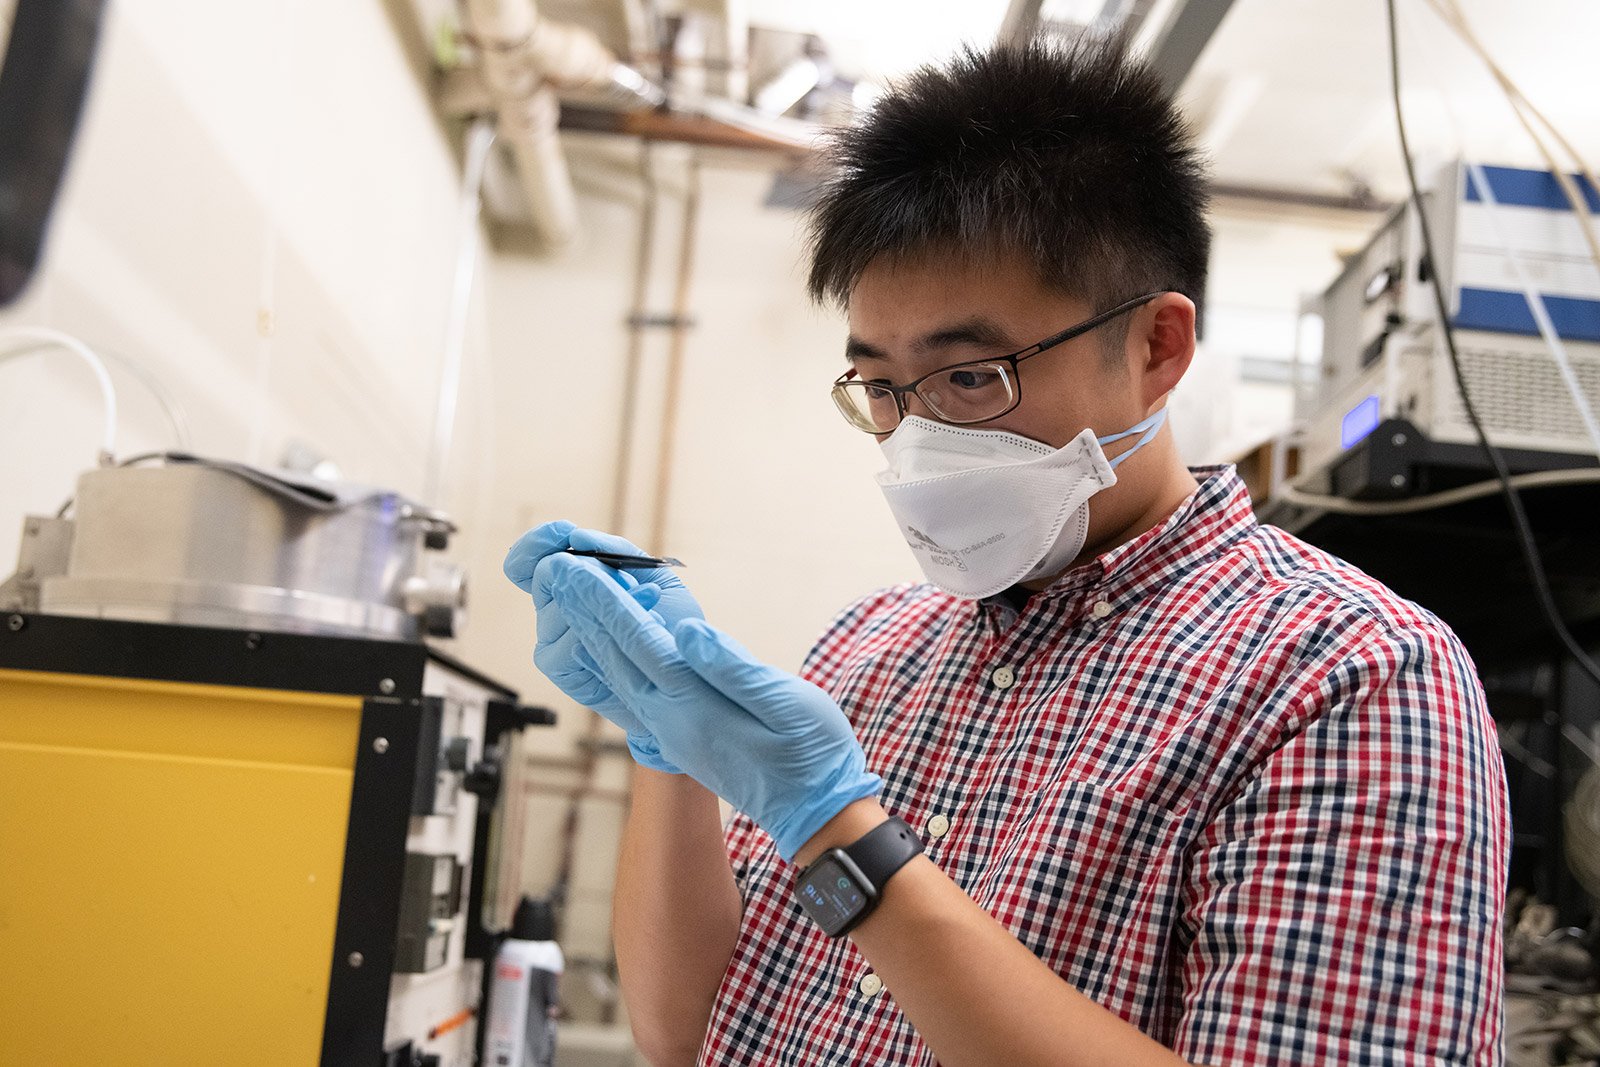 Chen-Hsuan (Steve) Lu inspects a substrate coated in graphene. Photo courtesy of Caltech.